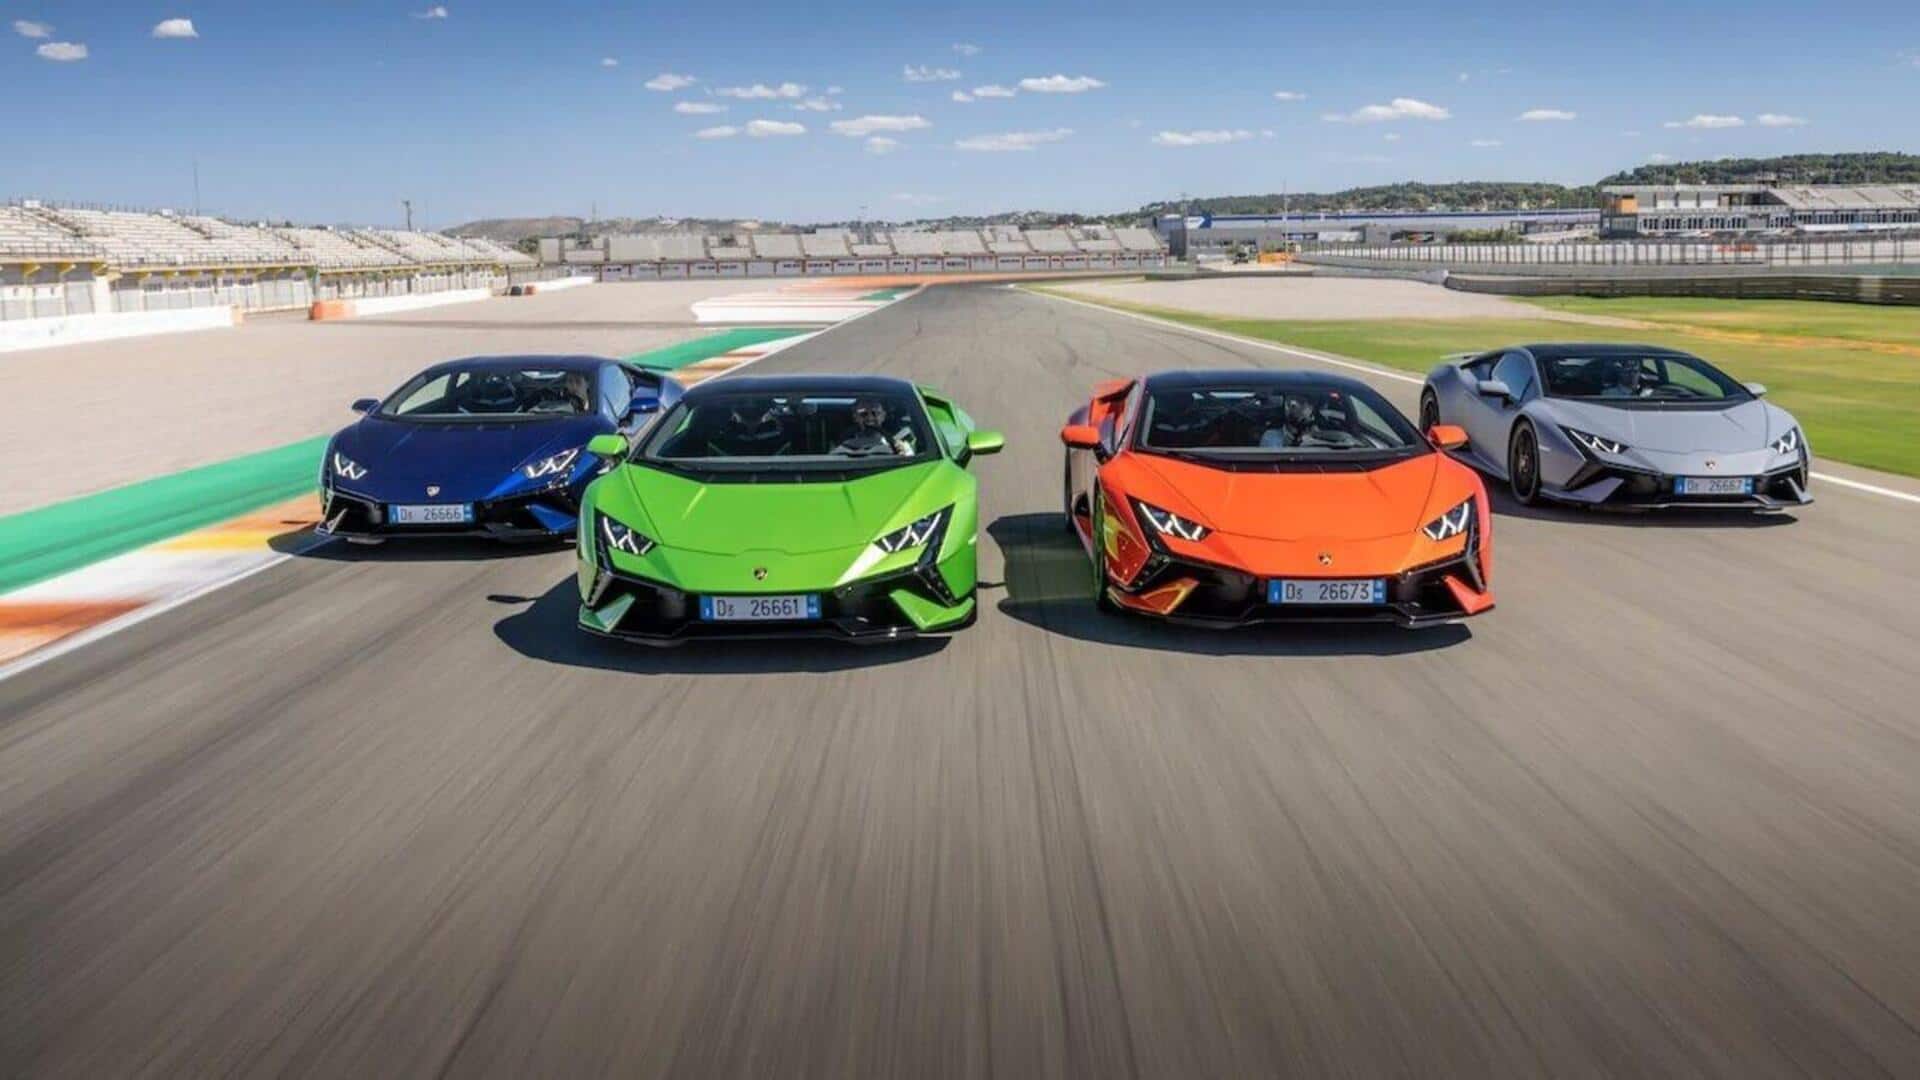 Lamborghini sold over 10,000 cars last year for first time